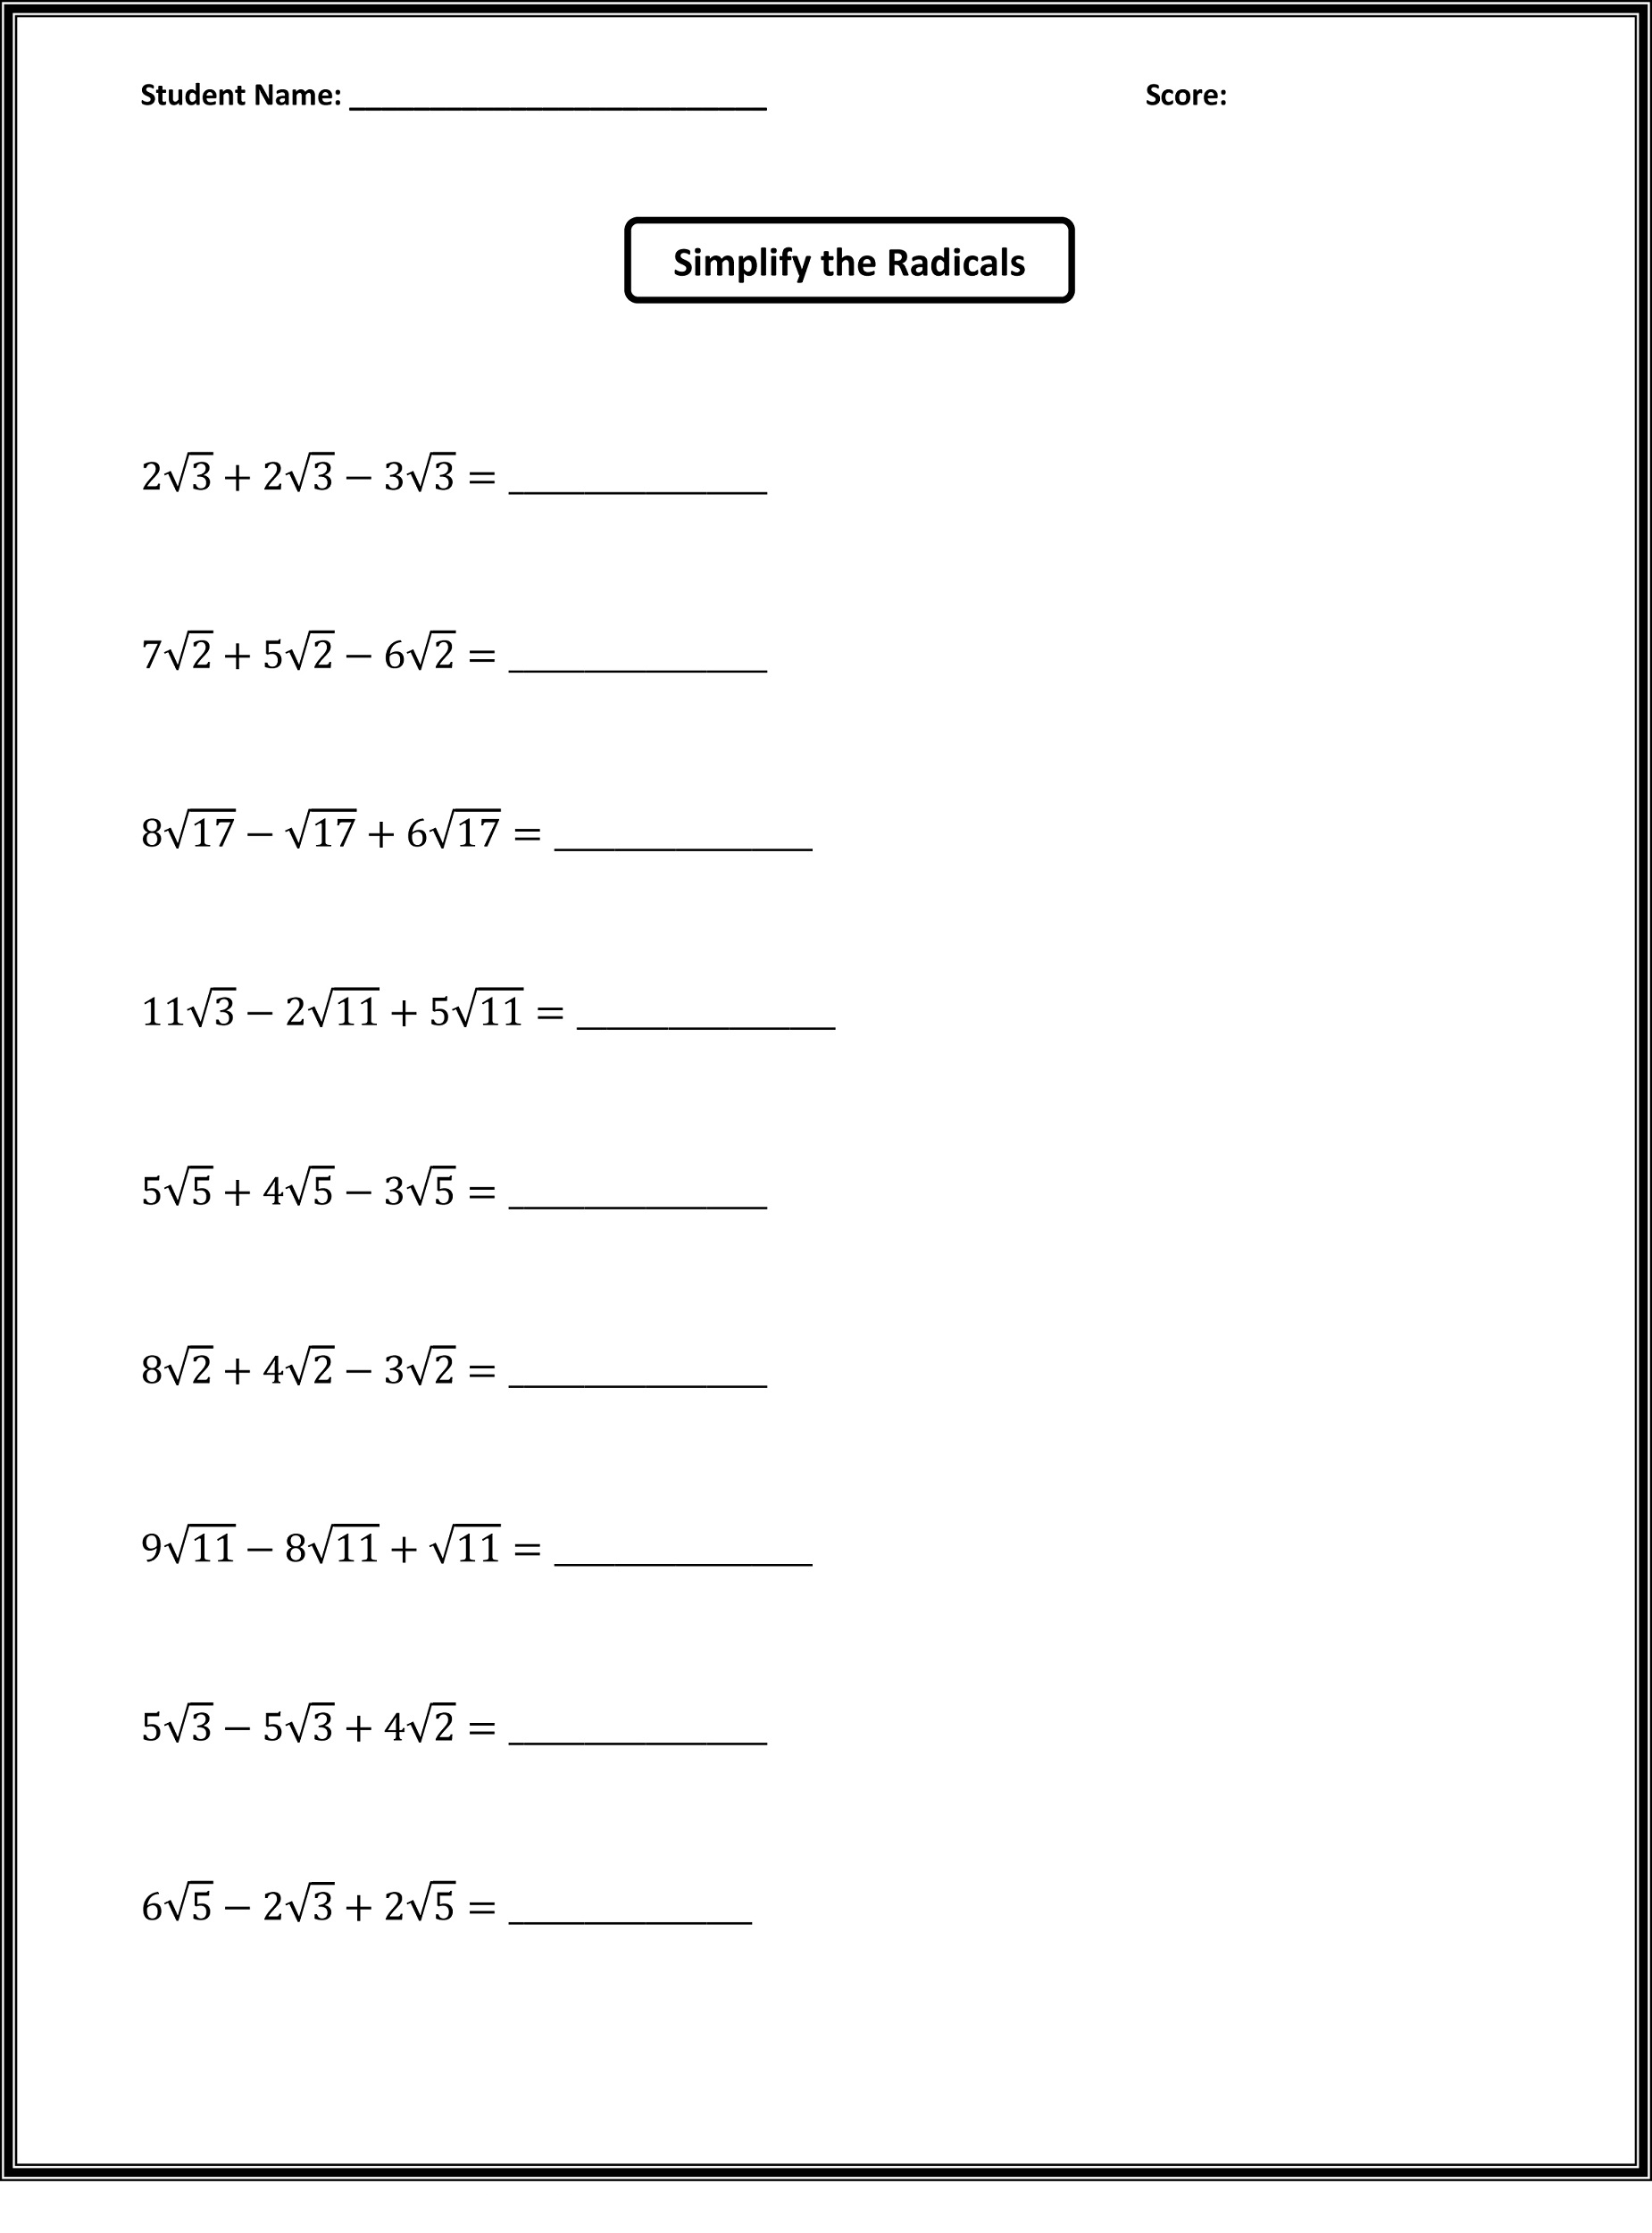 free-printable-addition-worksheets-3-digits